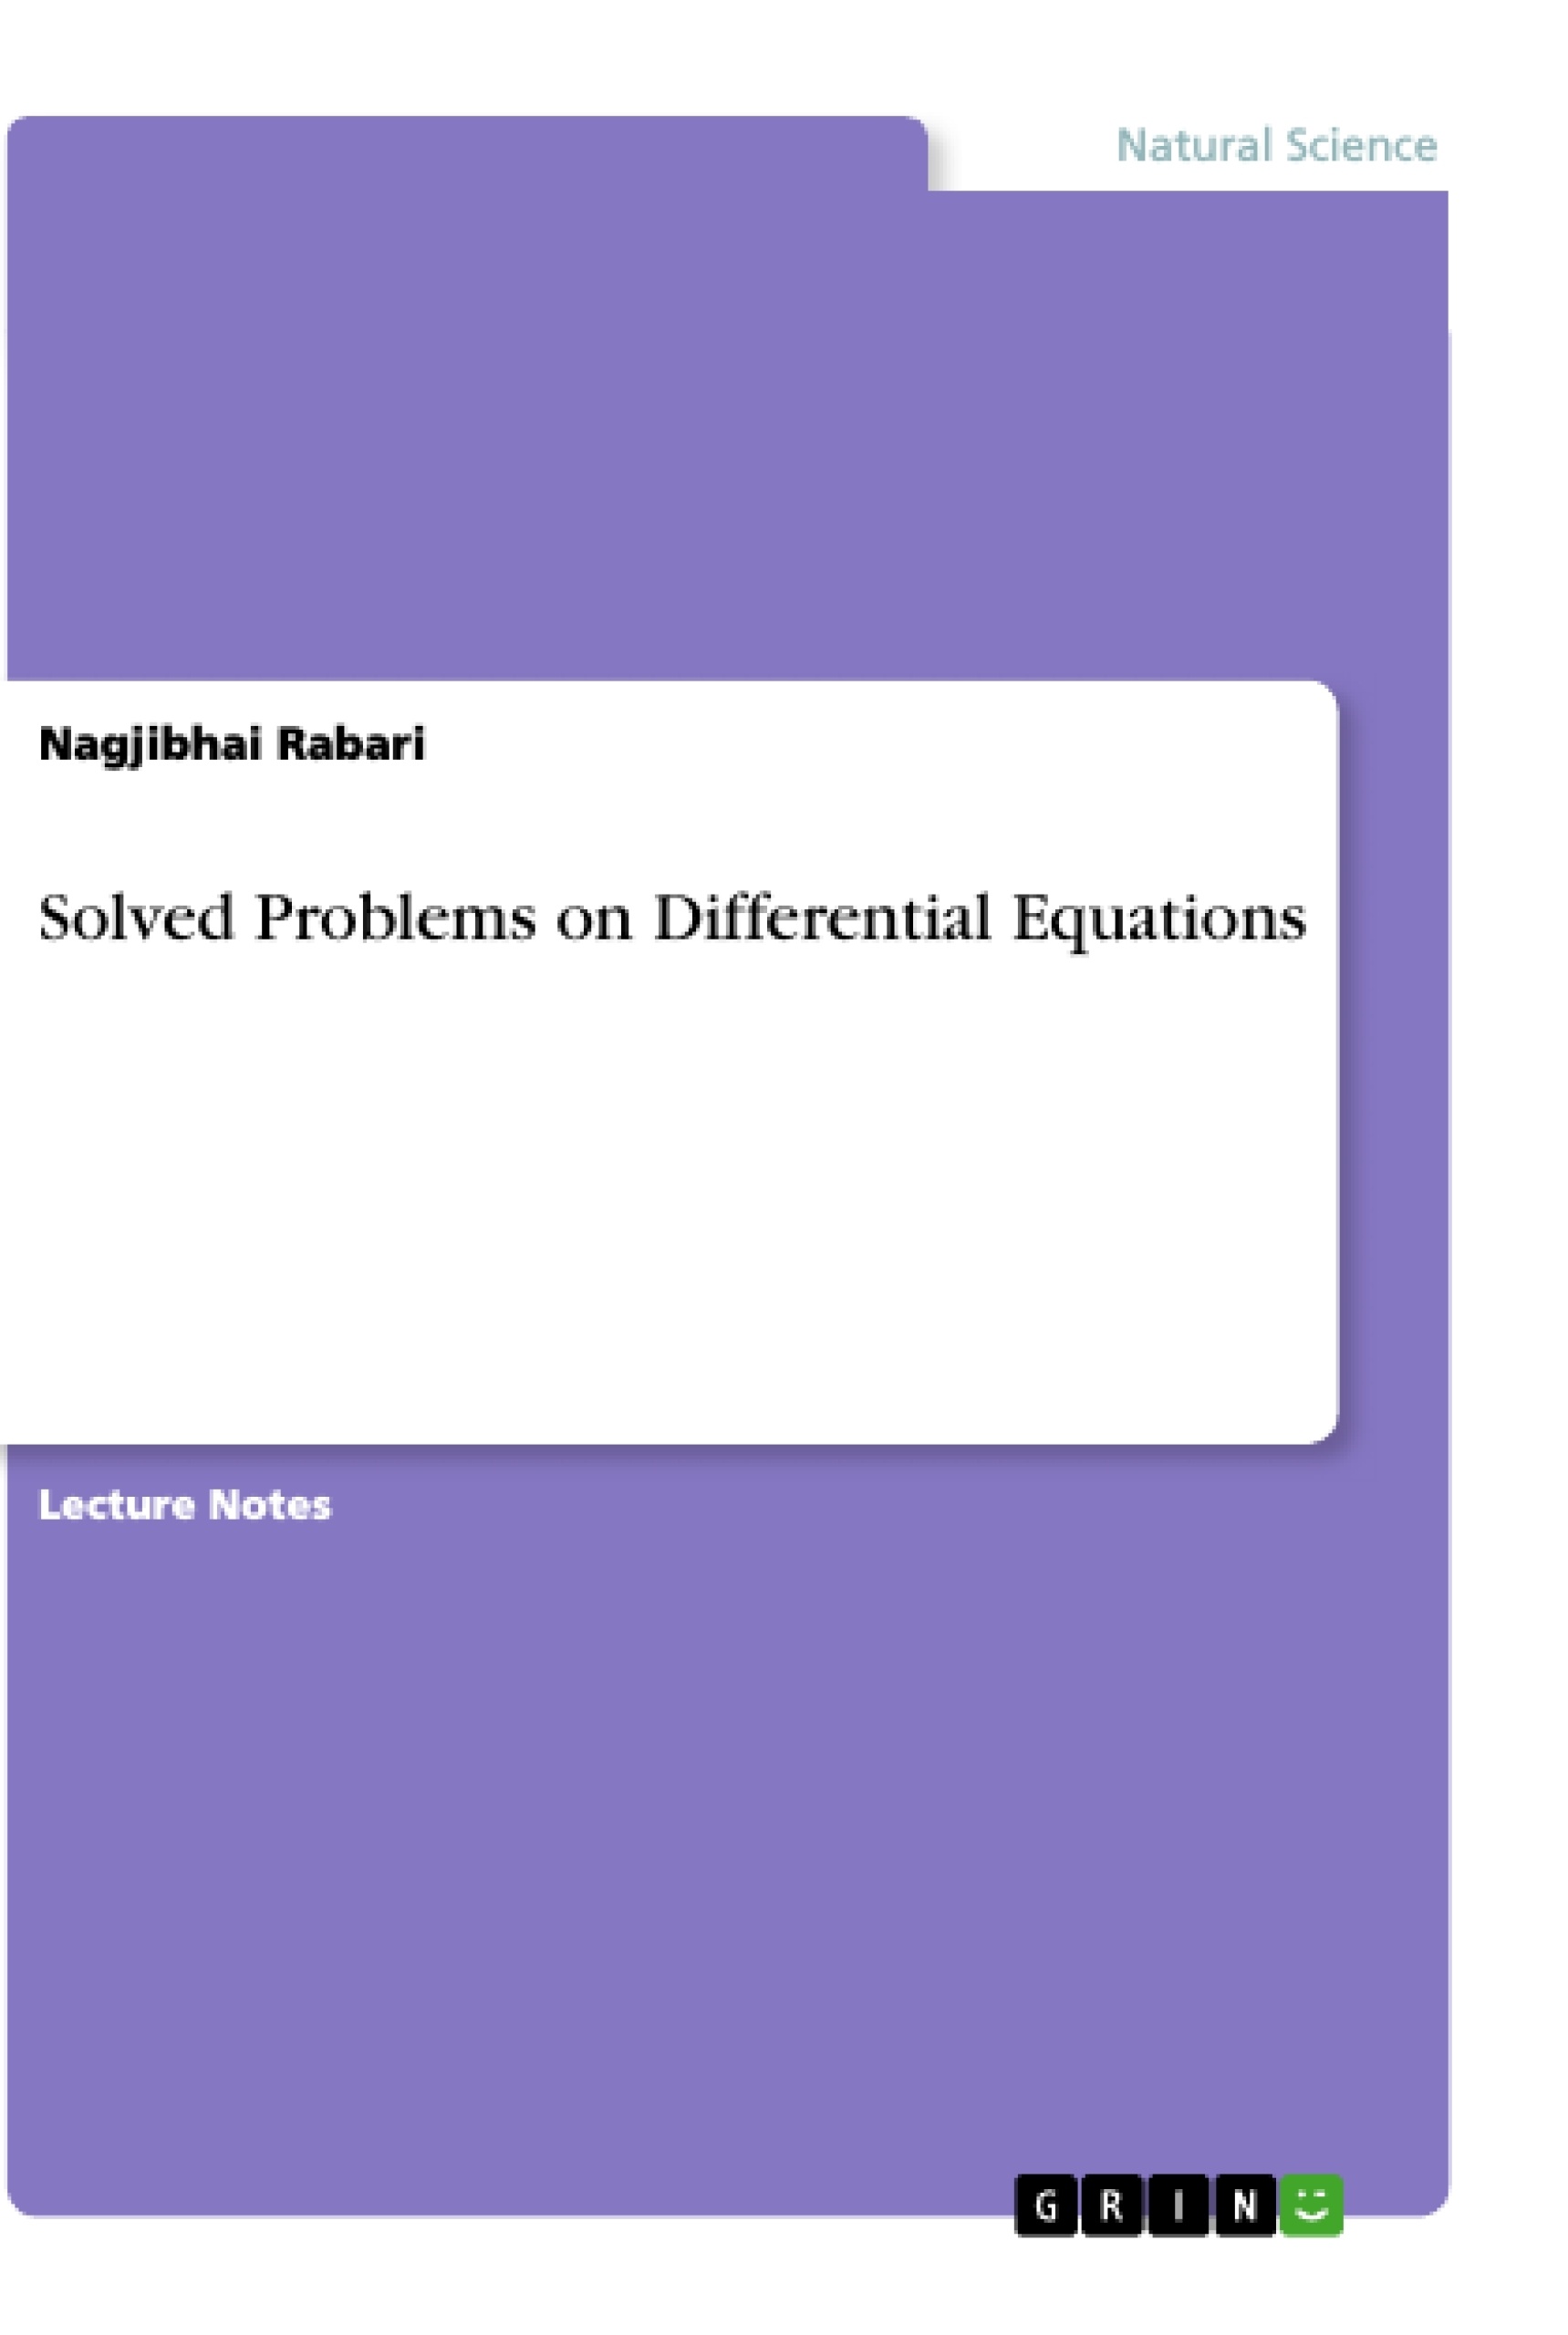 Title: Solved Problems on Differential Equations